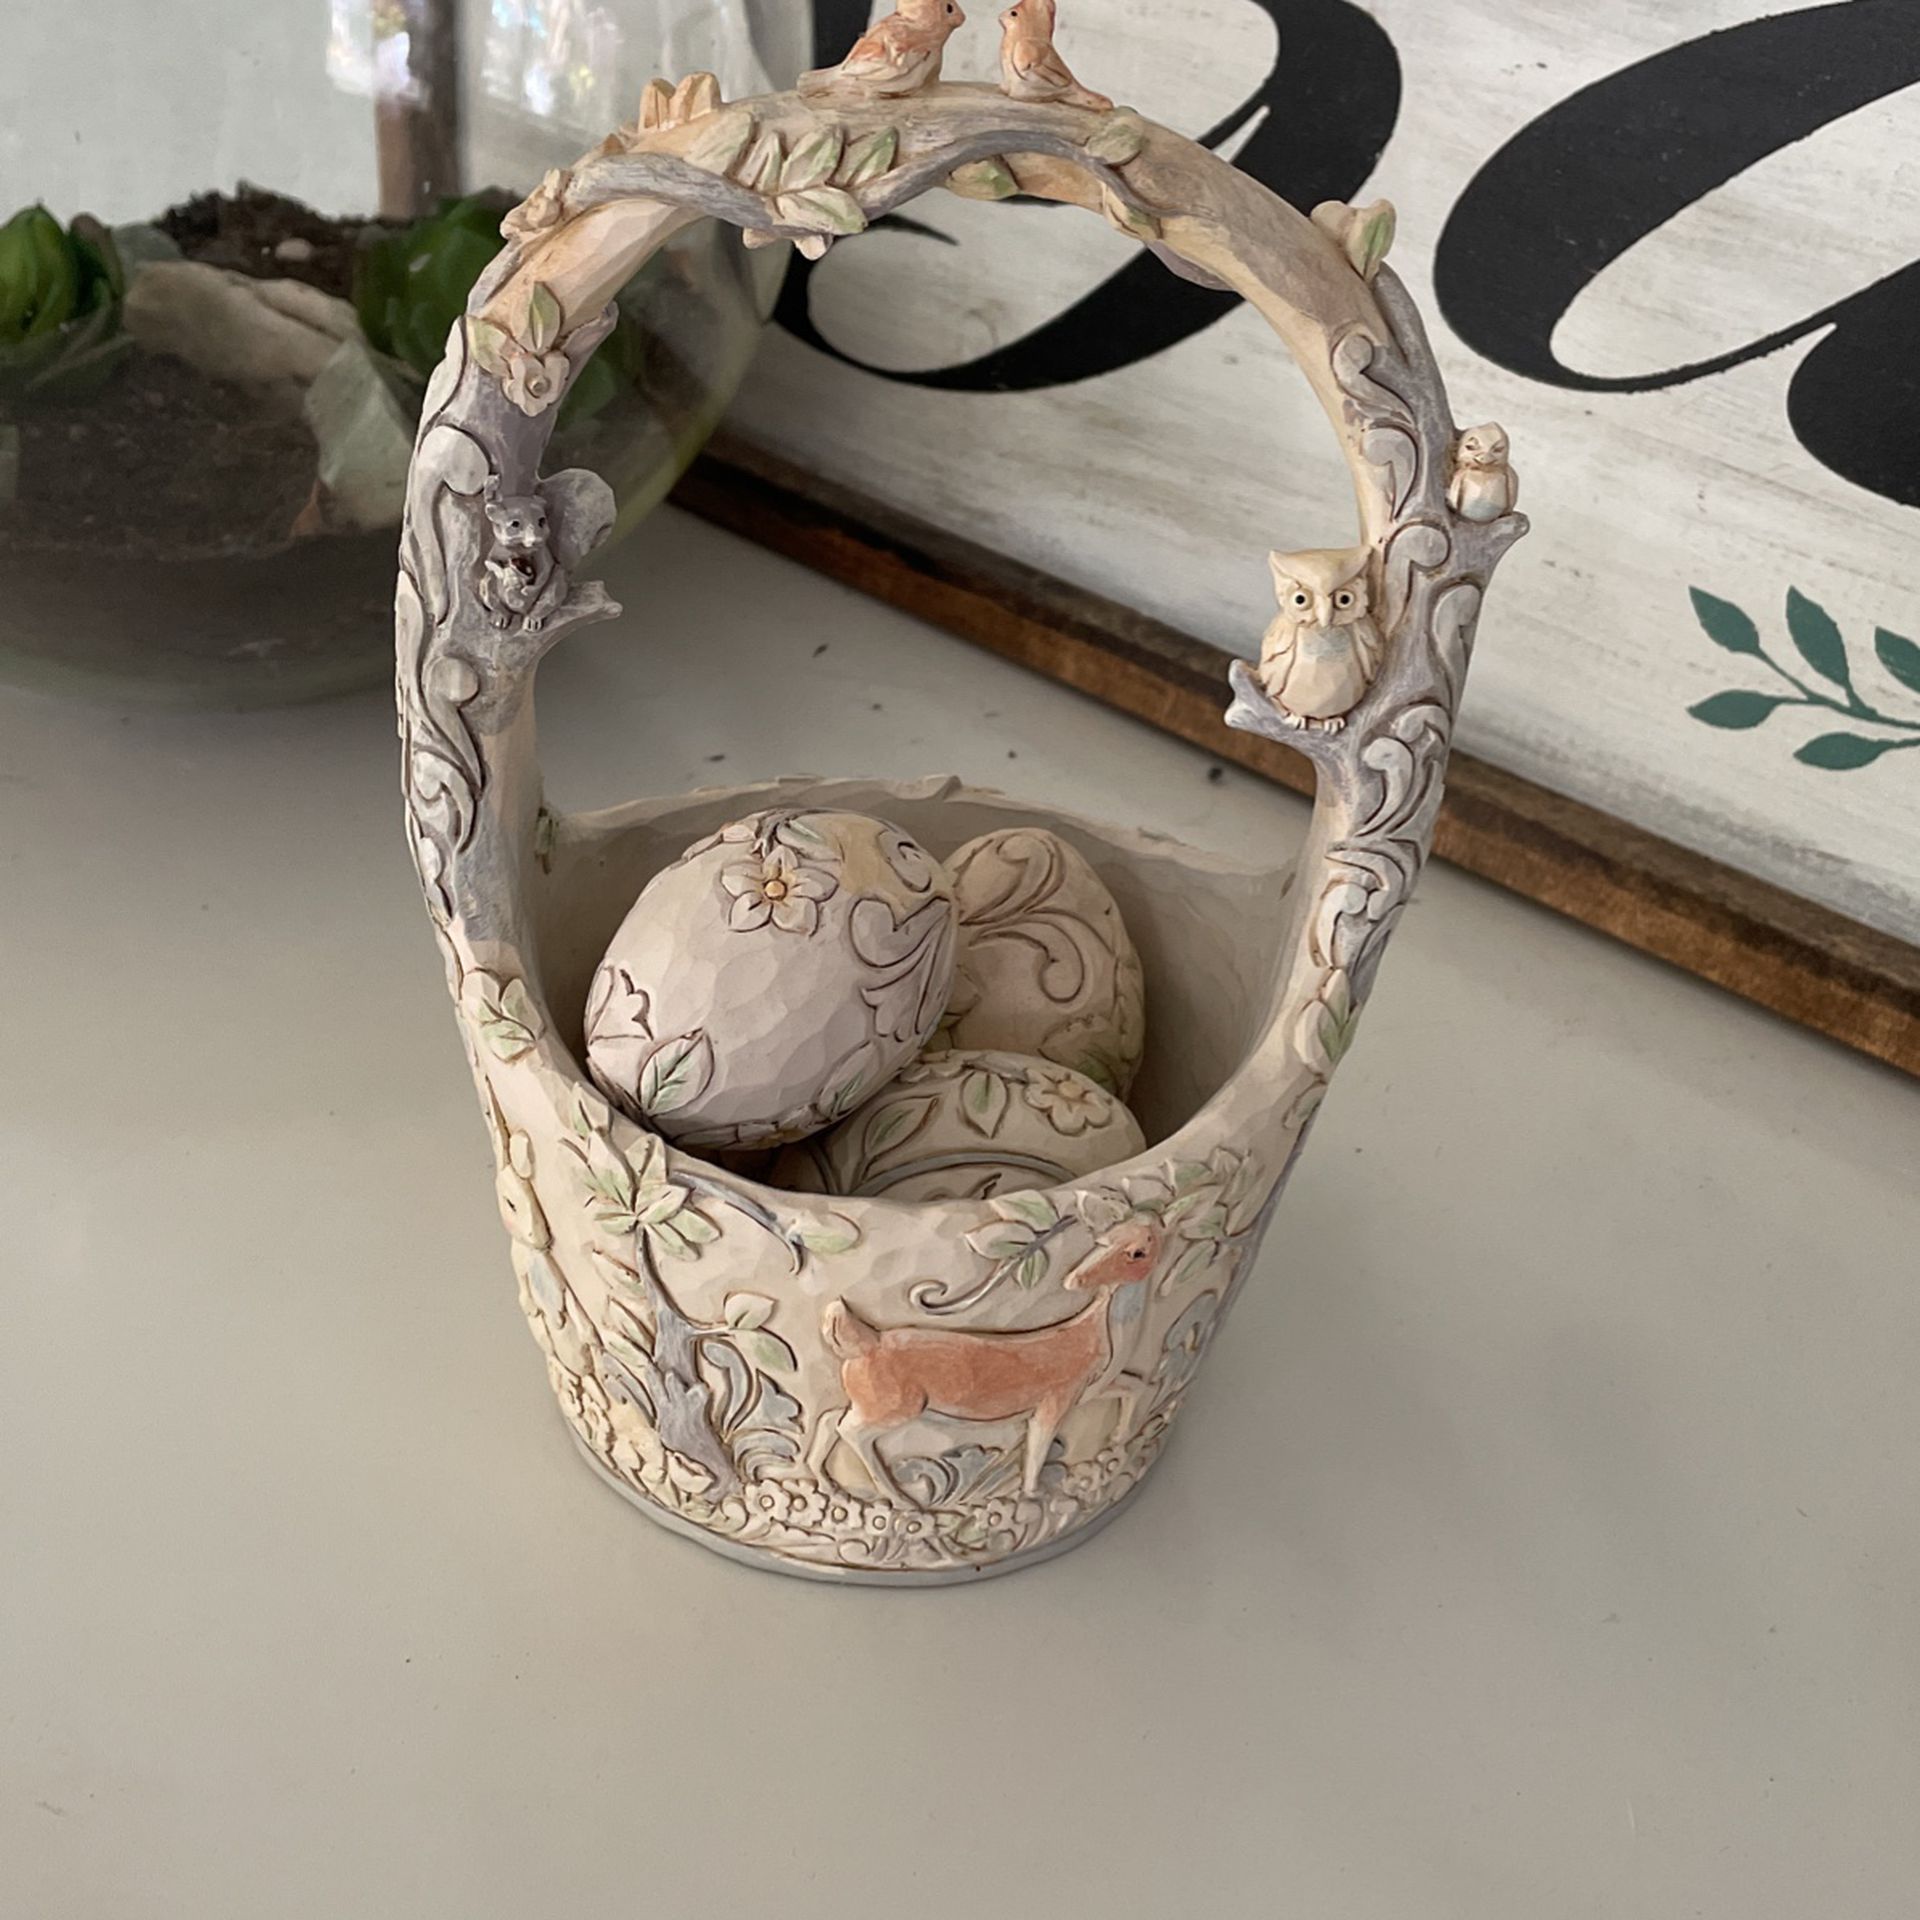 Jim Shore Easter Basket With 4 Eggs